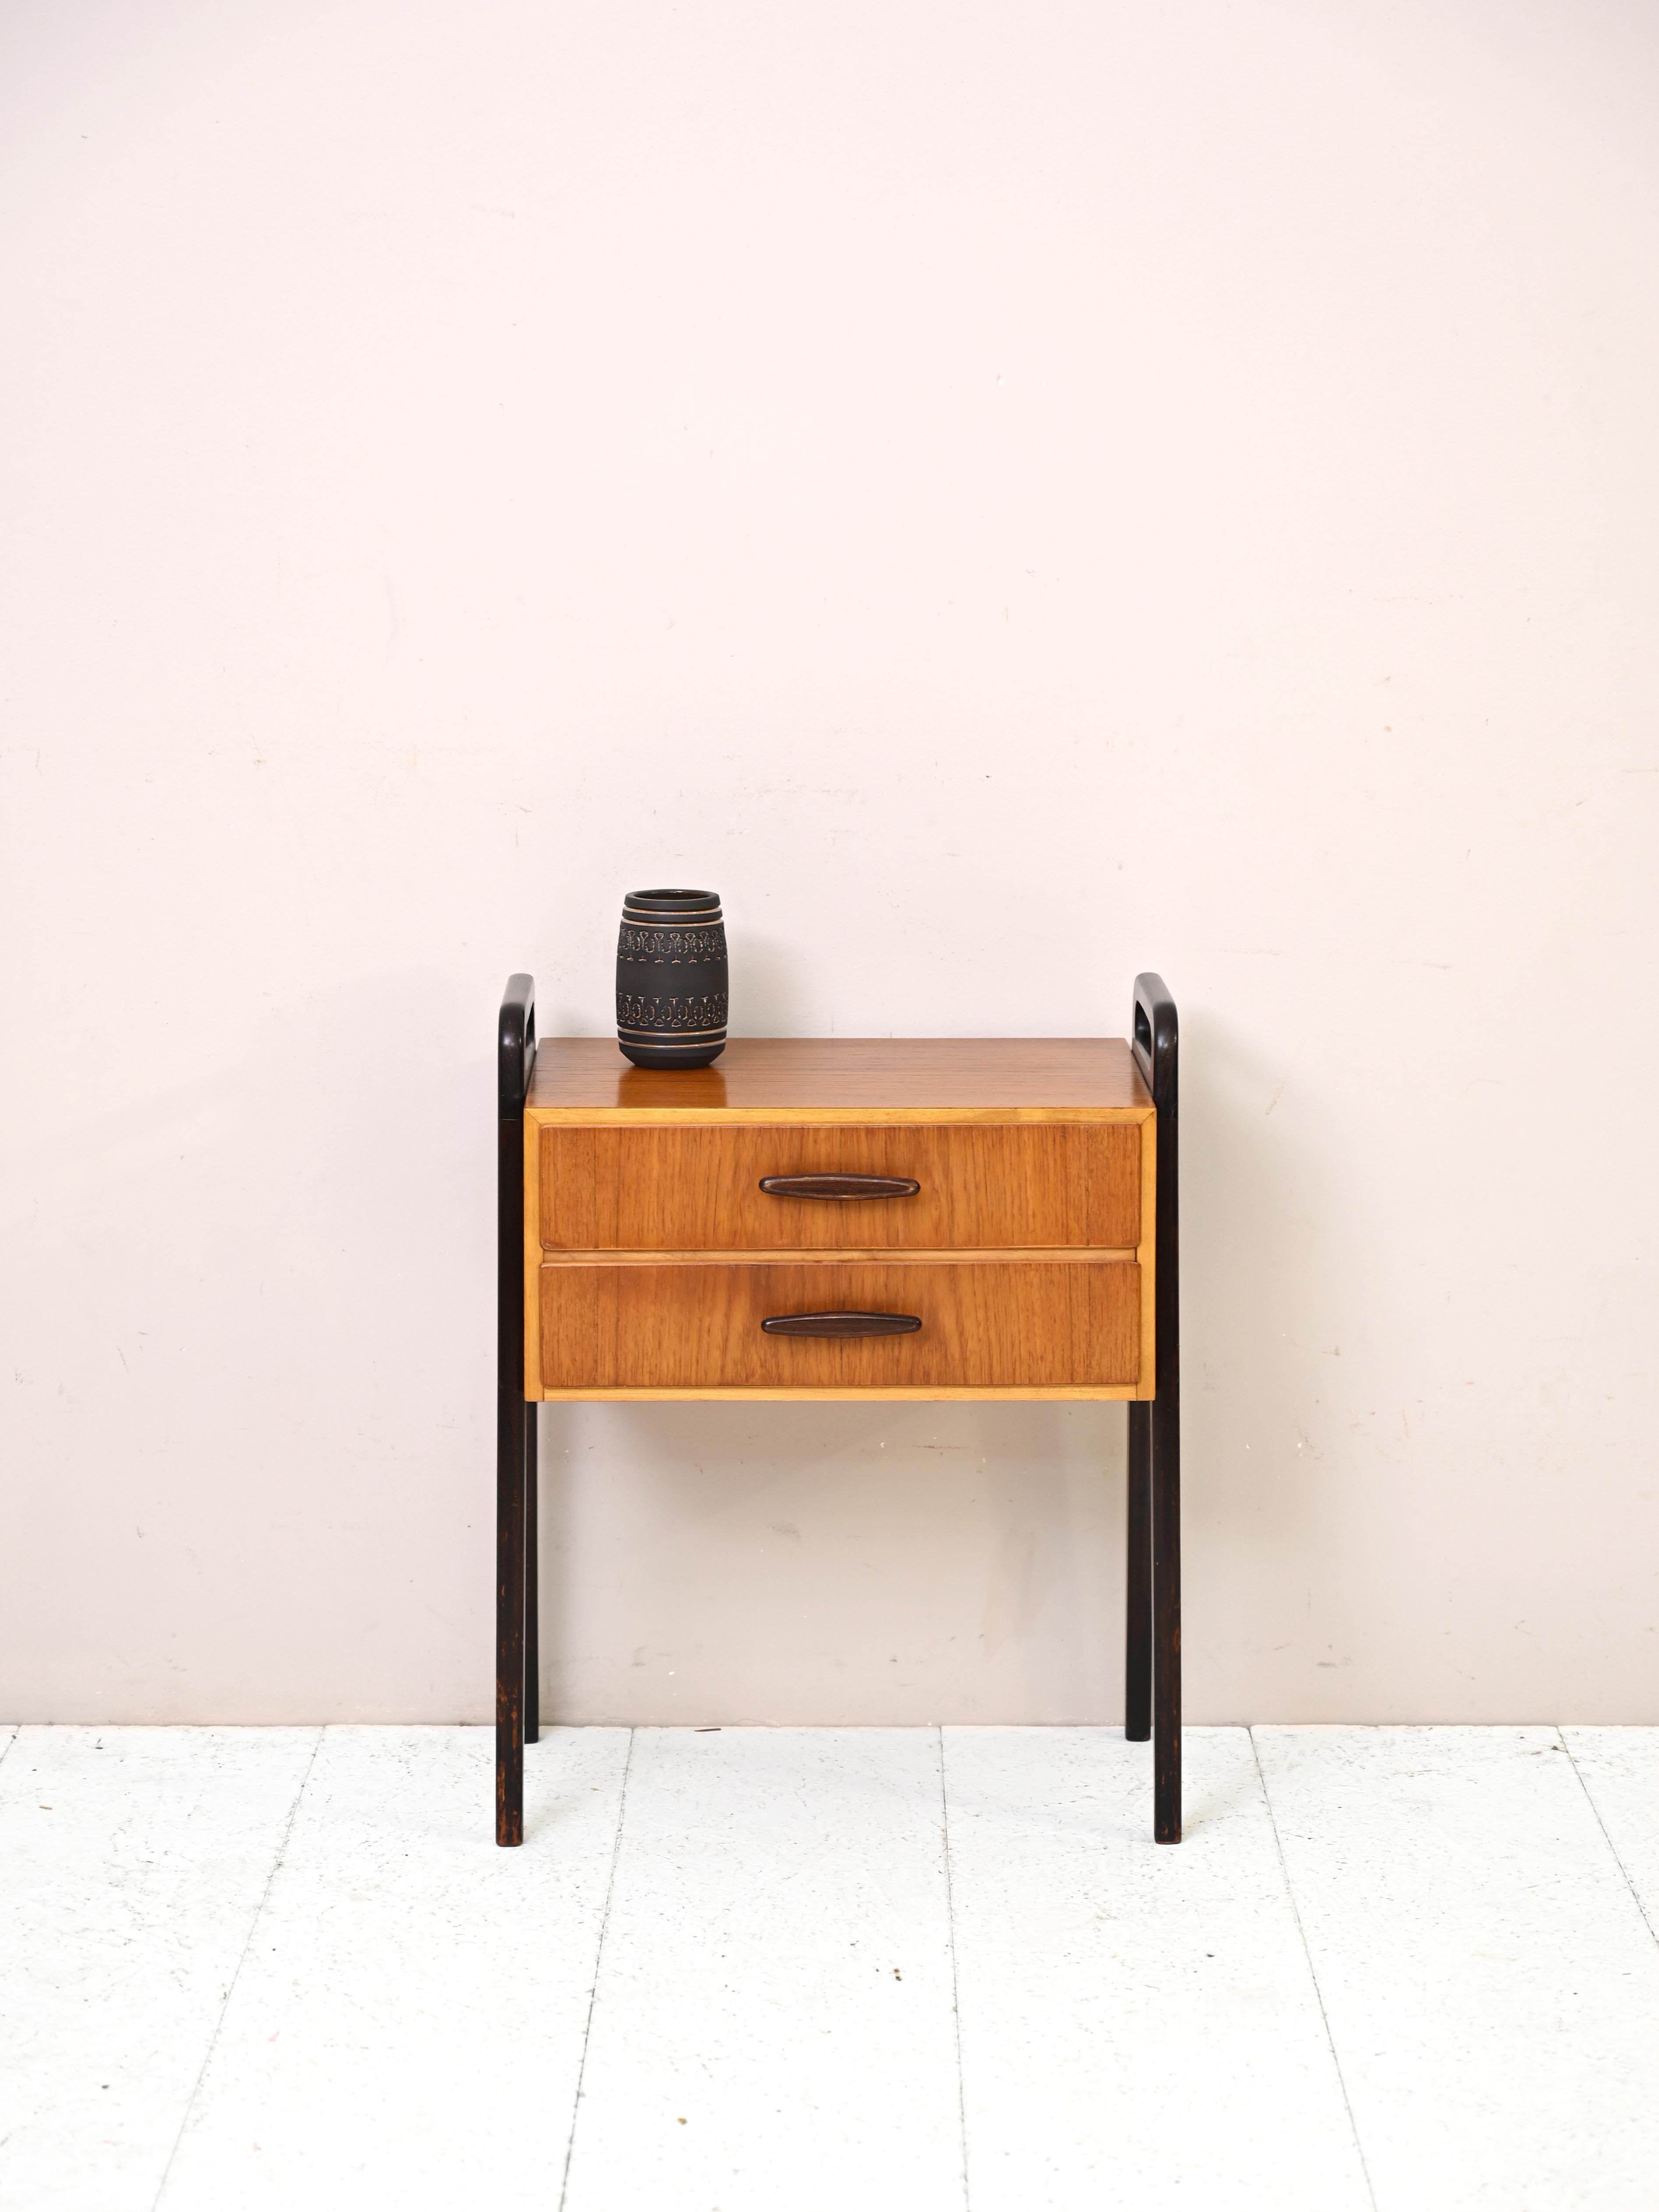 Original vintage teak cabinet with drawers.

This piece of furniture from the 1960s features a simple square teak wood frame with wooden handle drawers. Its uniqueness lies in the black-painted wooden U-shaped frame that goes into the legs and and